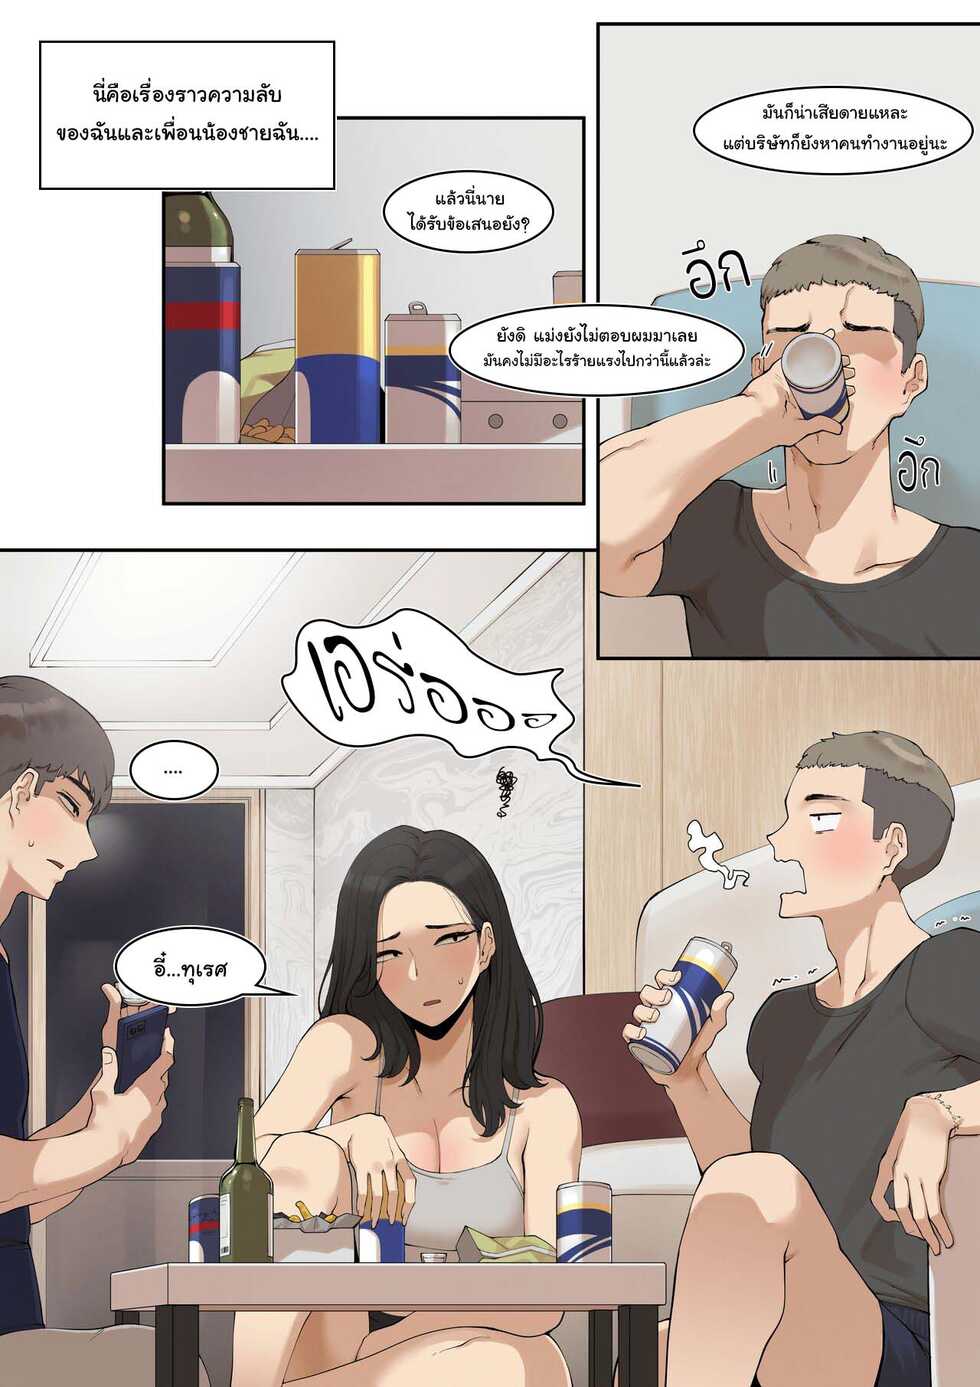 [ABBB] A dirty little secret about myself and my brother's.. friend [Thai ภาษาไทย] - Page 2